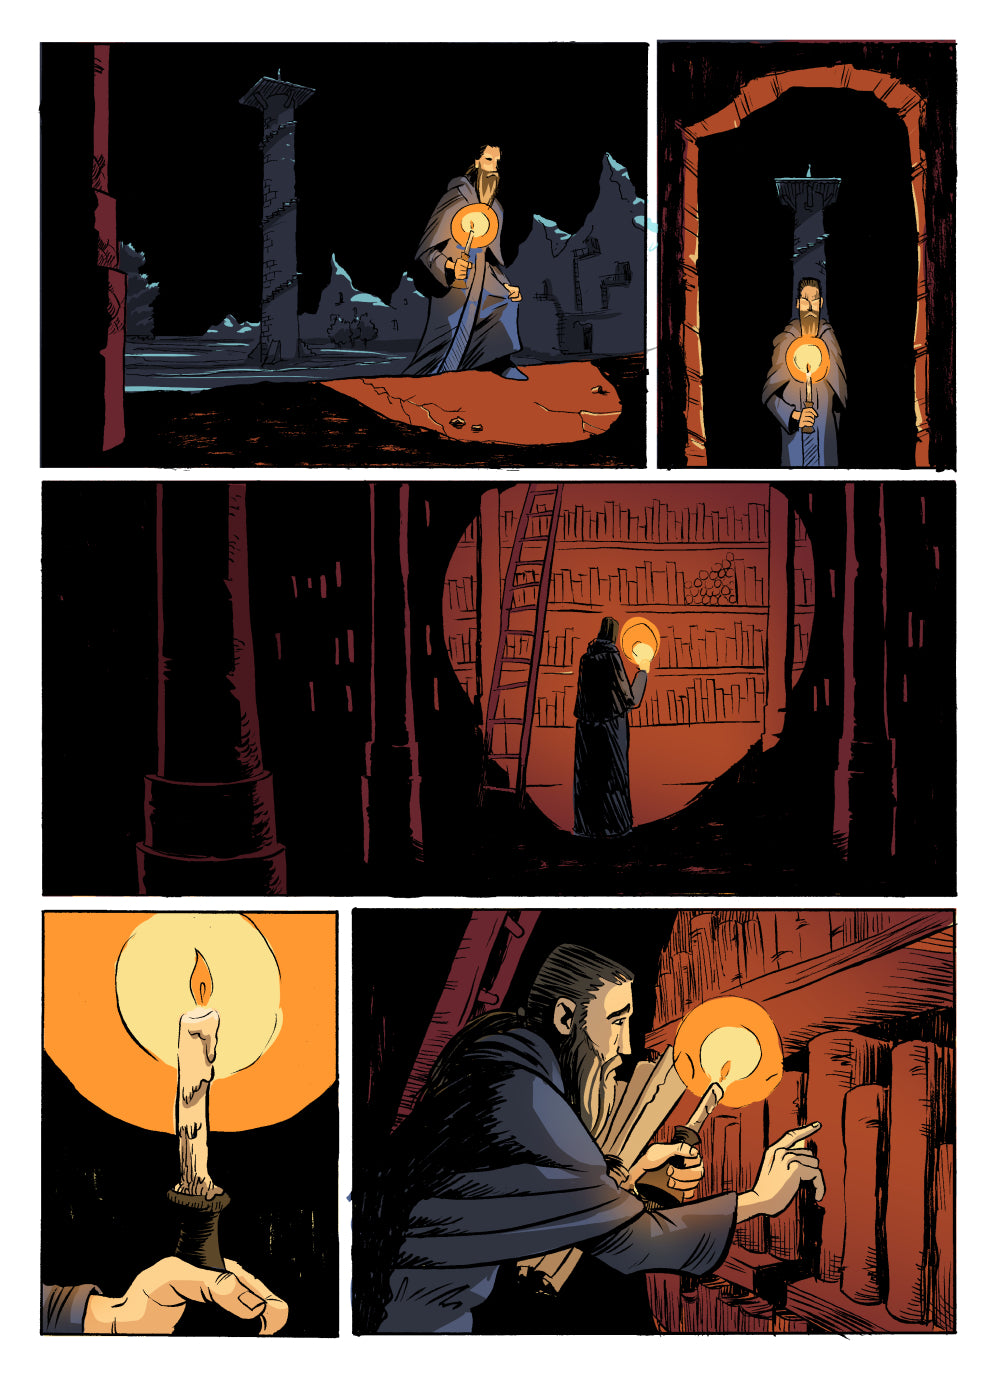 God's'Dog Book Page 1 Preview